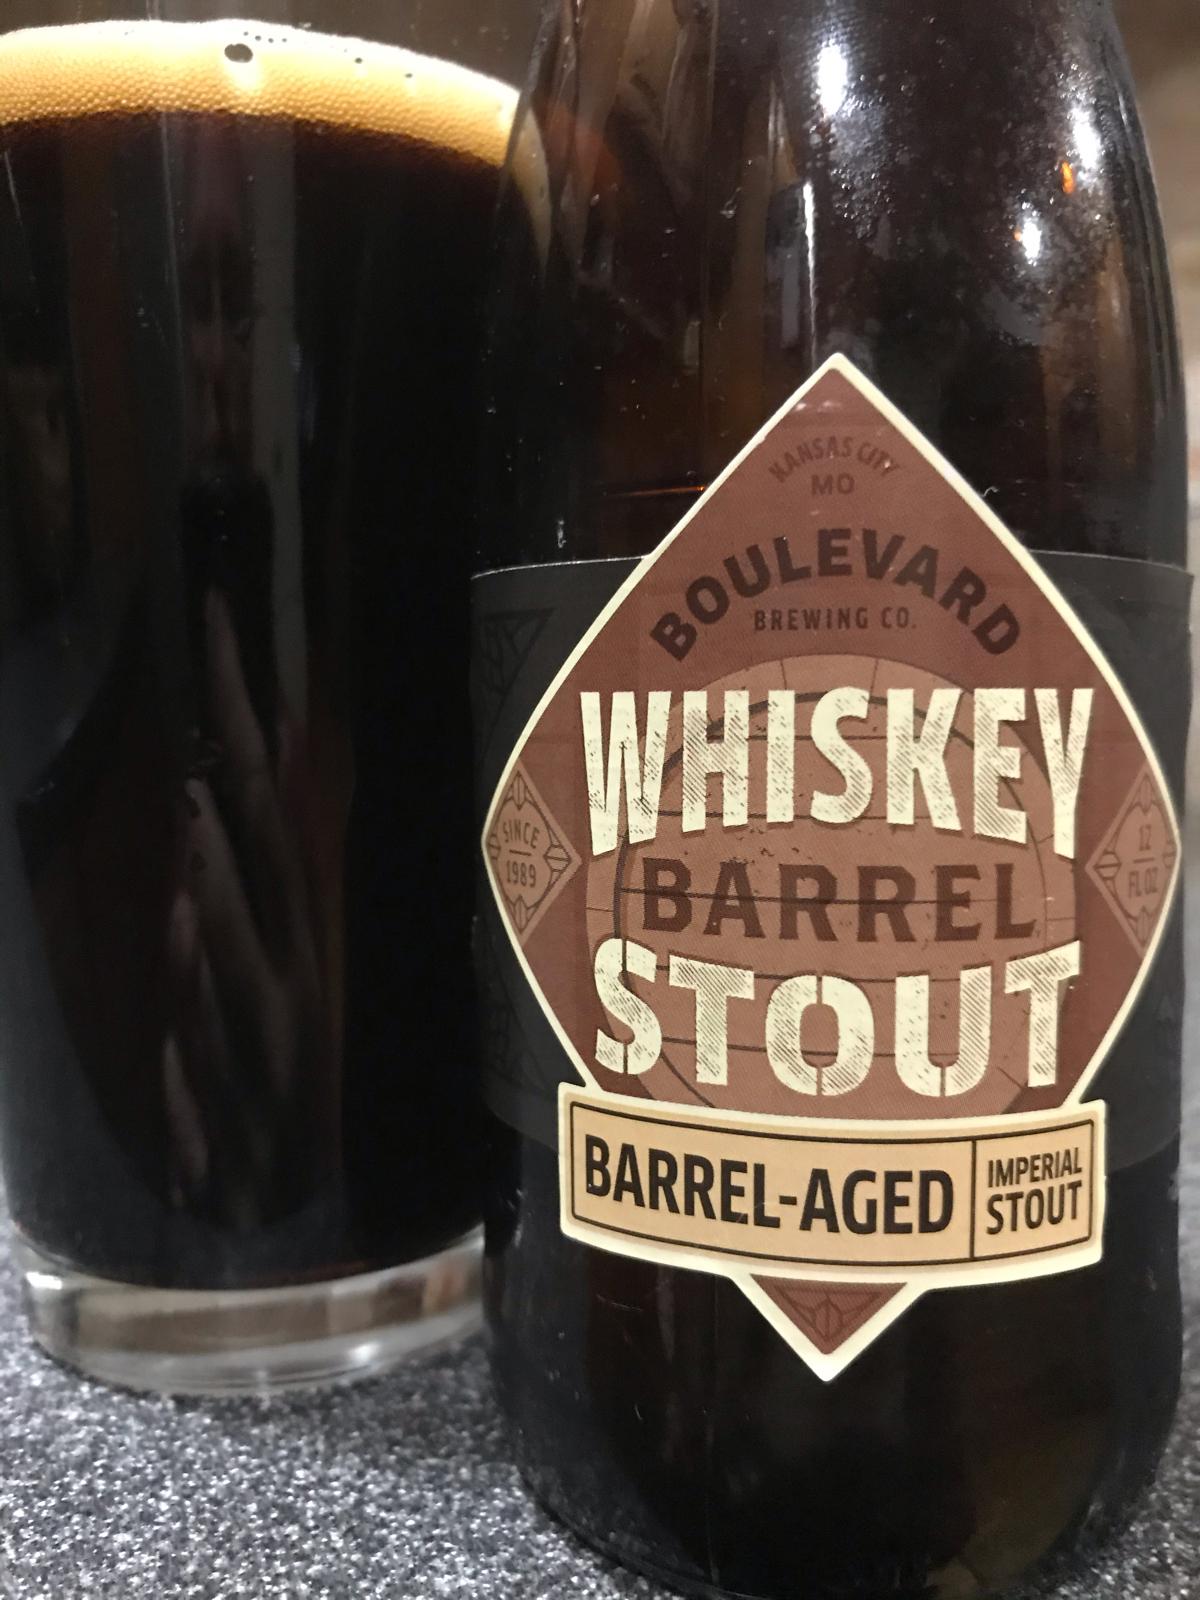 Imperial Stout (2014 Whisky Barrel Aged)